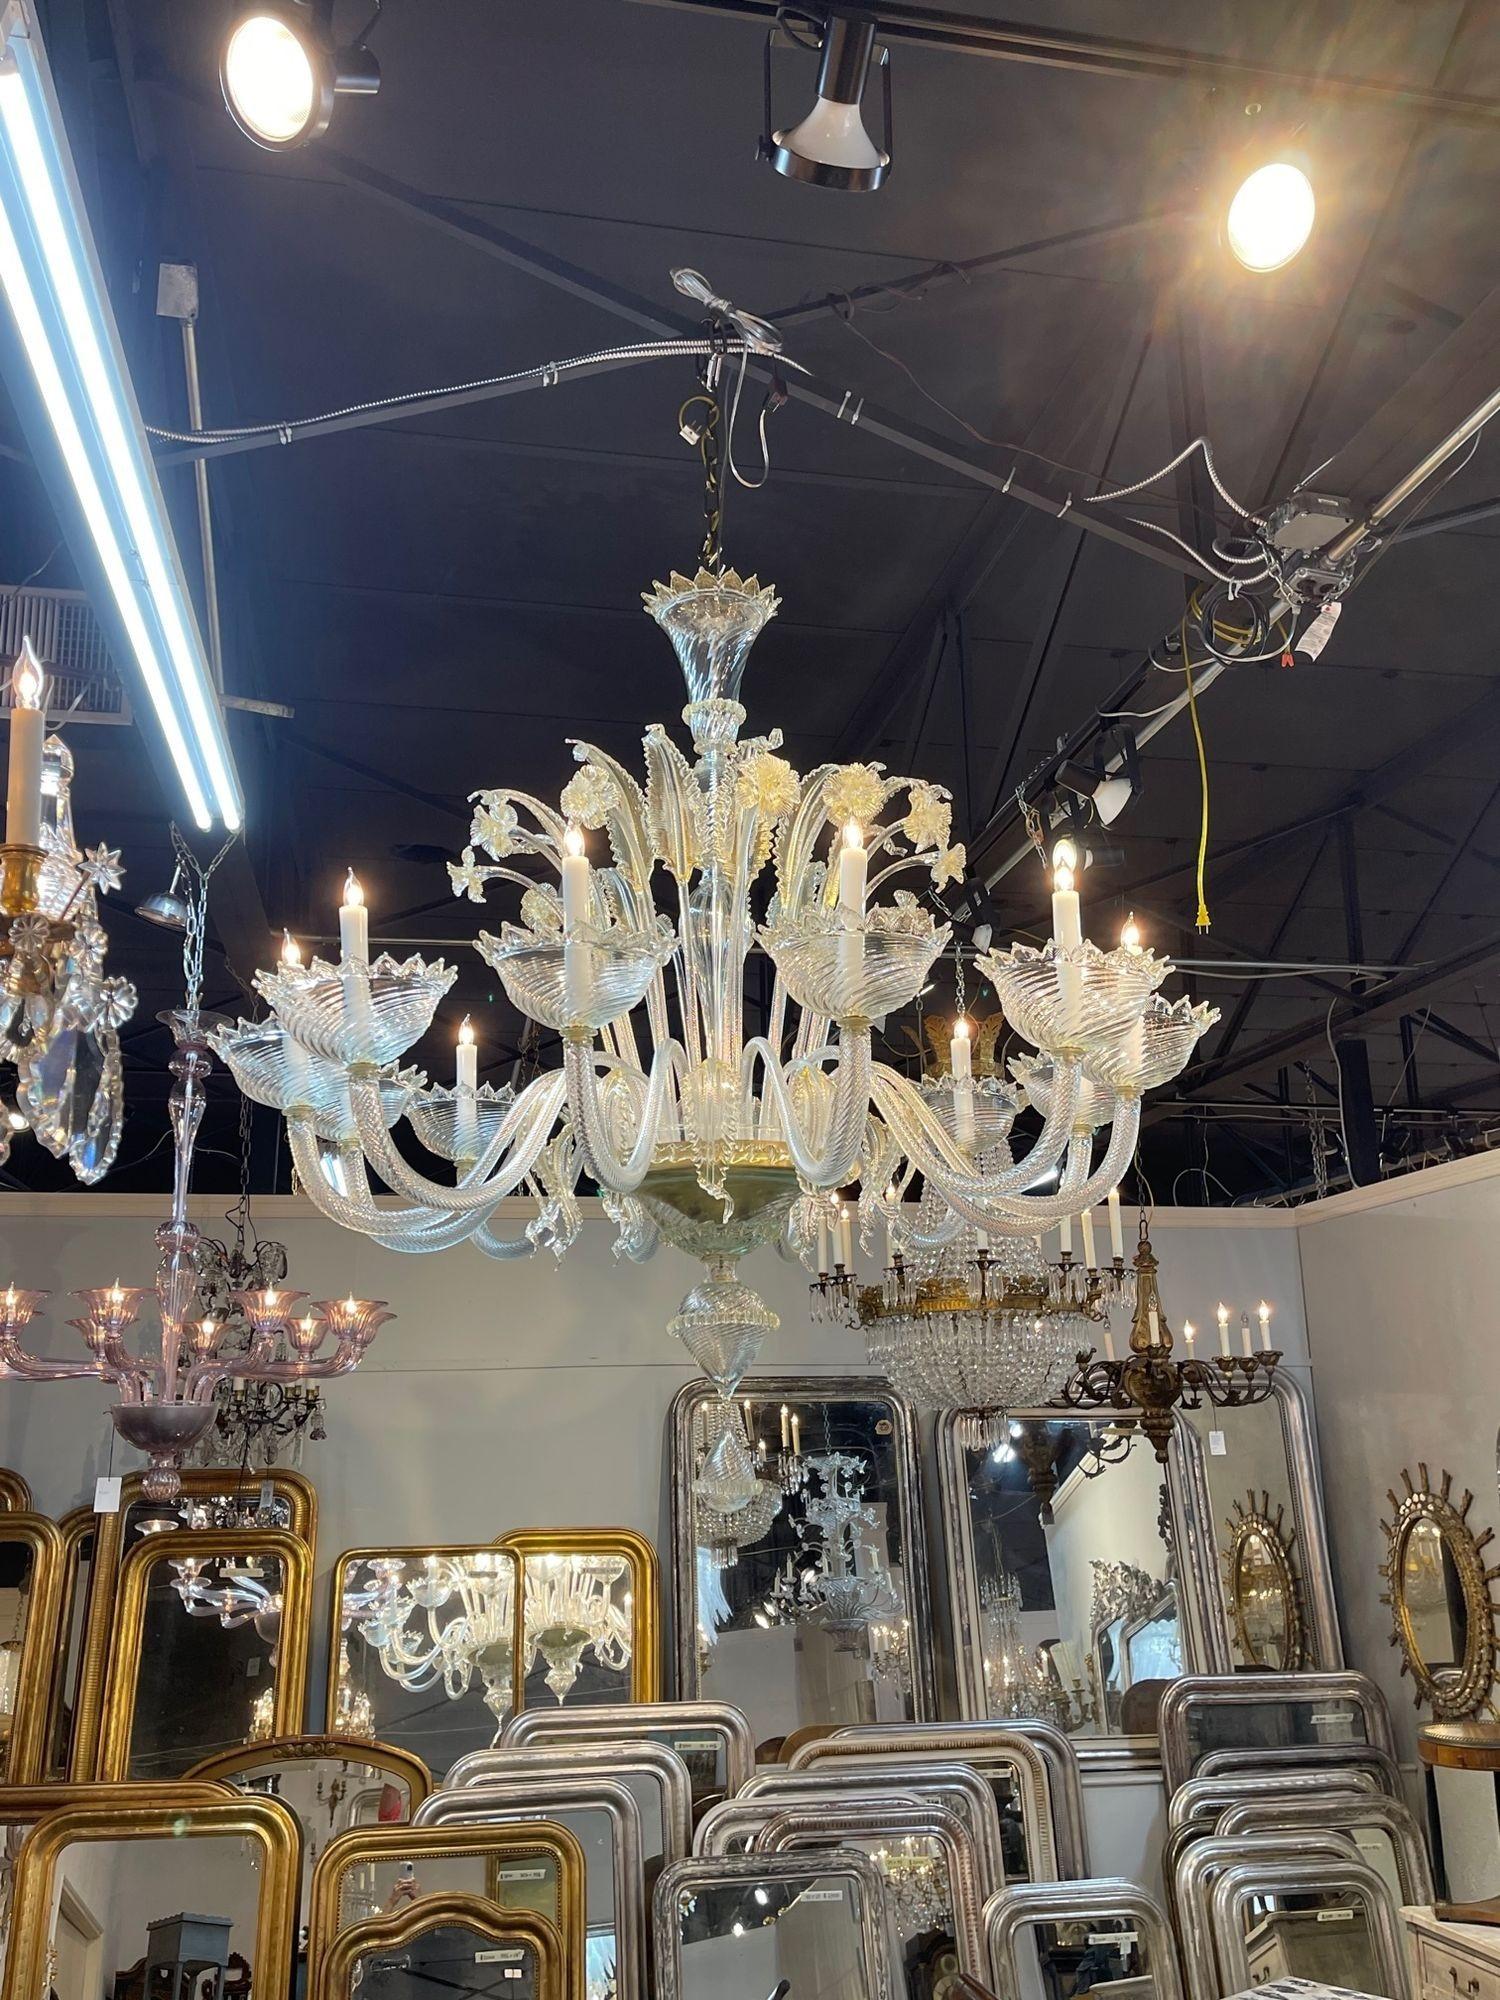 Modern palace size Venetian gold glass chandelier with 12 arms. Featuring beautiful gold glass with decorative leaves and flowers and beautiful curved arms. A true work of art. Stunning!!.